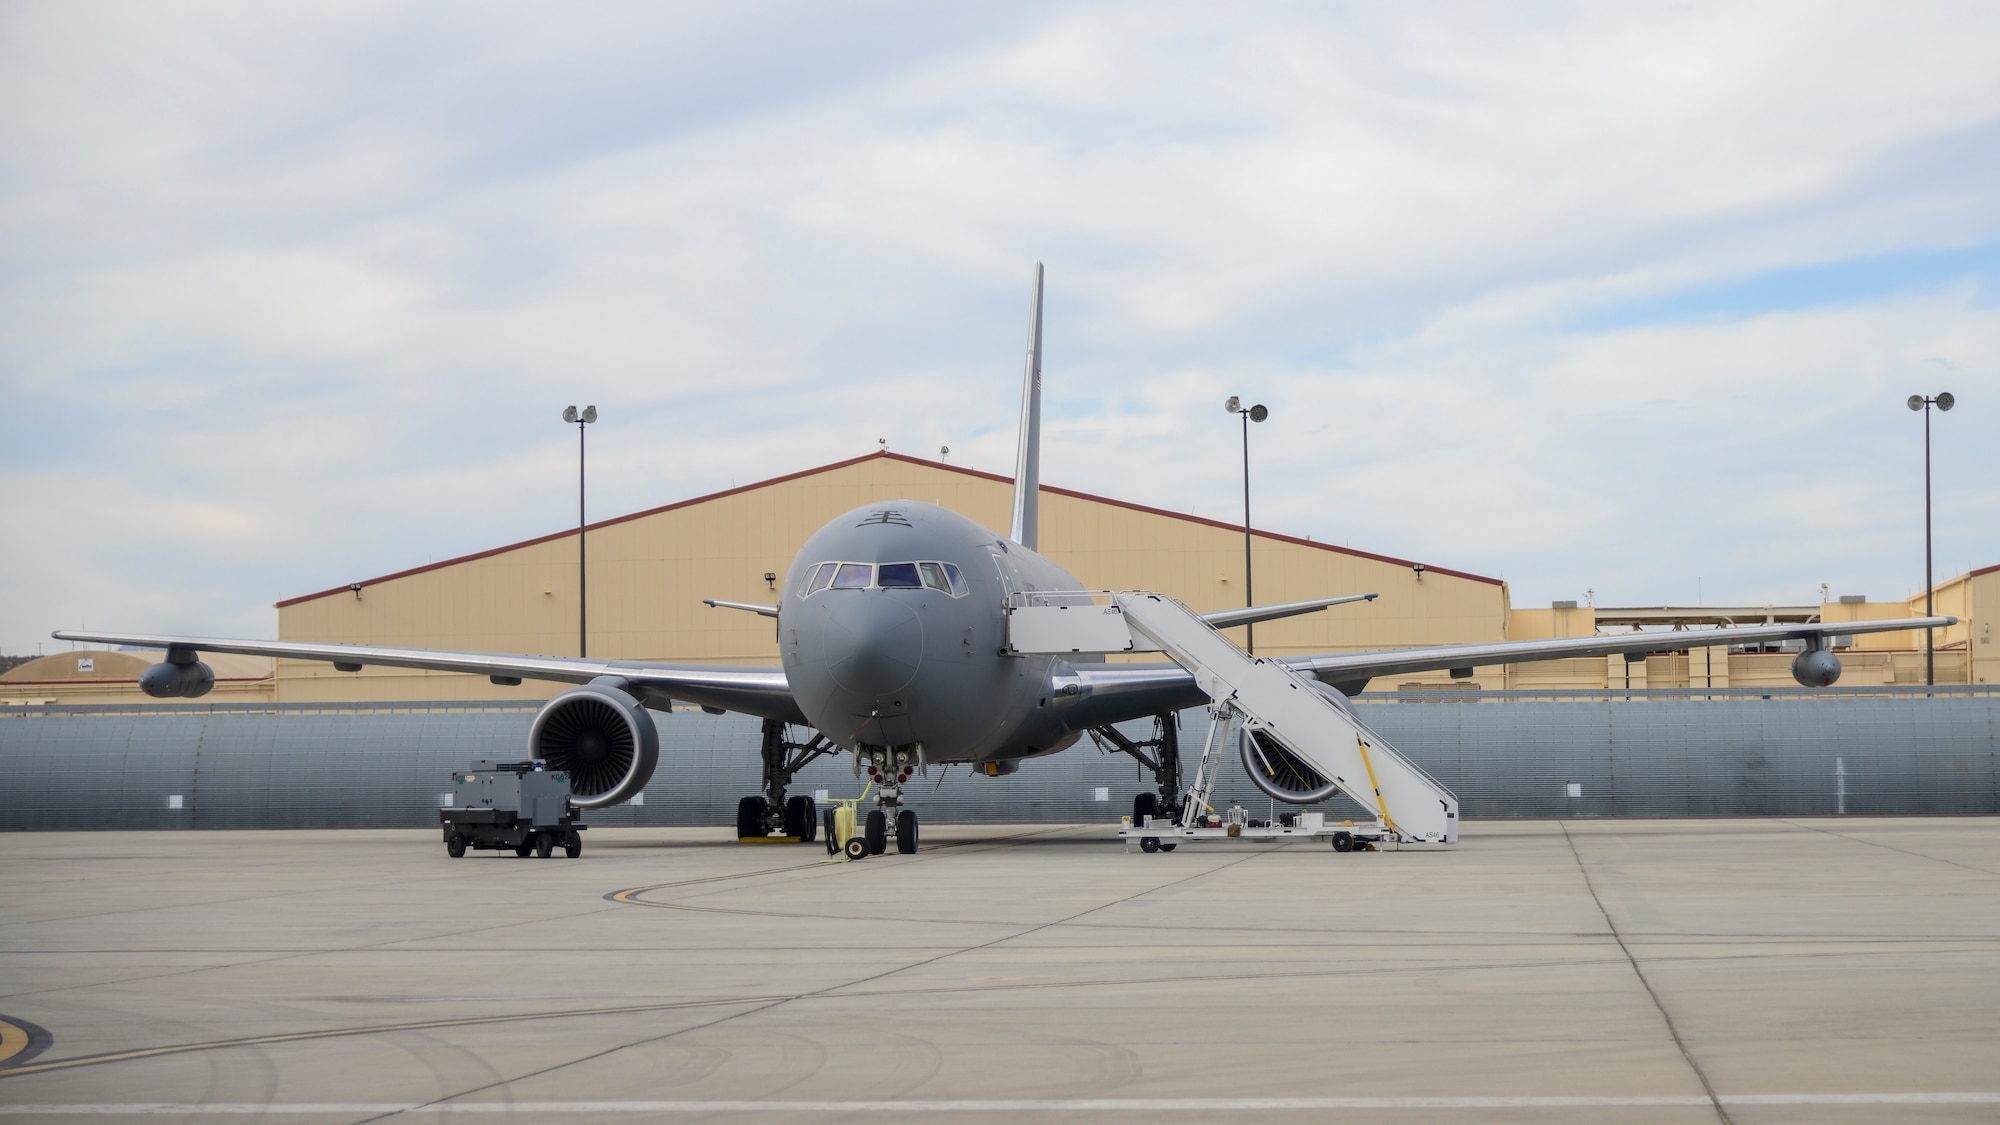 A KC-46 Pegasus is parked at a ramp at Edwards Air Force Base, California, with a Wing Aerial Refueling Pod (WARP) on each wing. The KC-46 Pegasus recently finished WARPs testing with an AV-8B and F-18D/G. The WARPs system allows the Pegasus to simultaneously refuel two aircraft via drogue chutes. (U.S. Air Force photo by Giancarlo Casem)